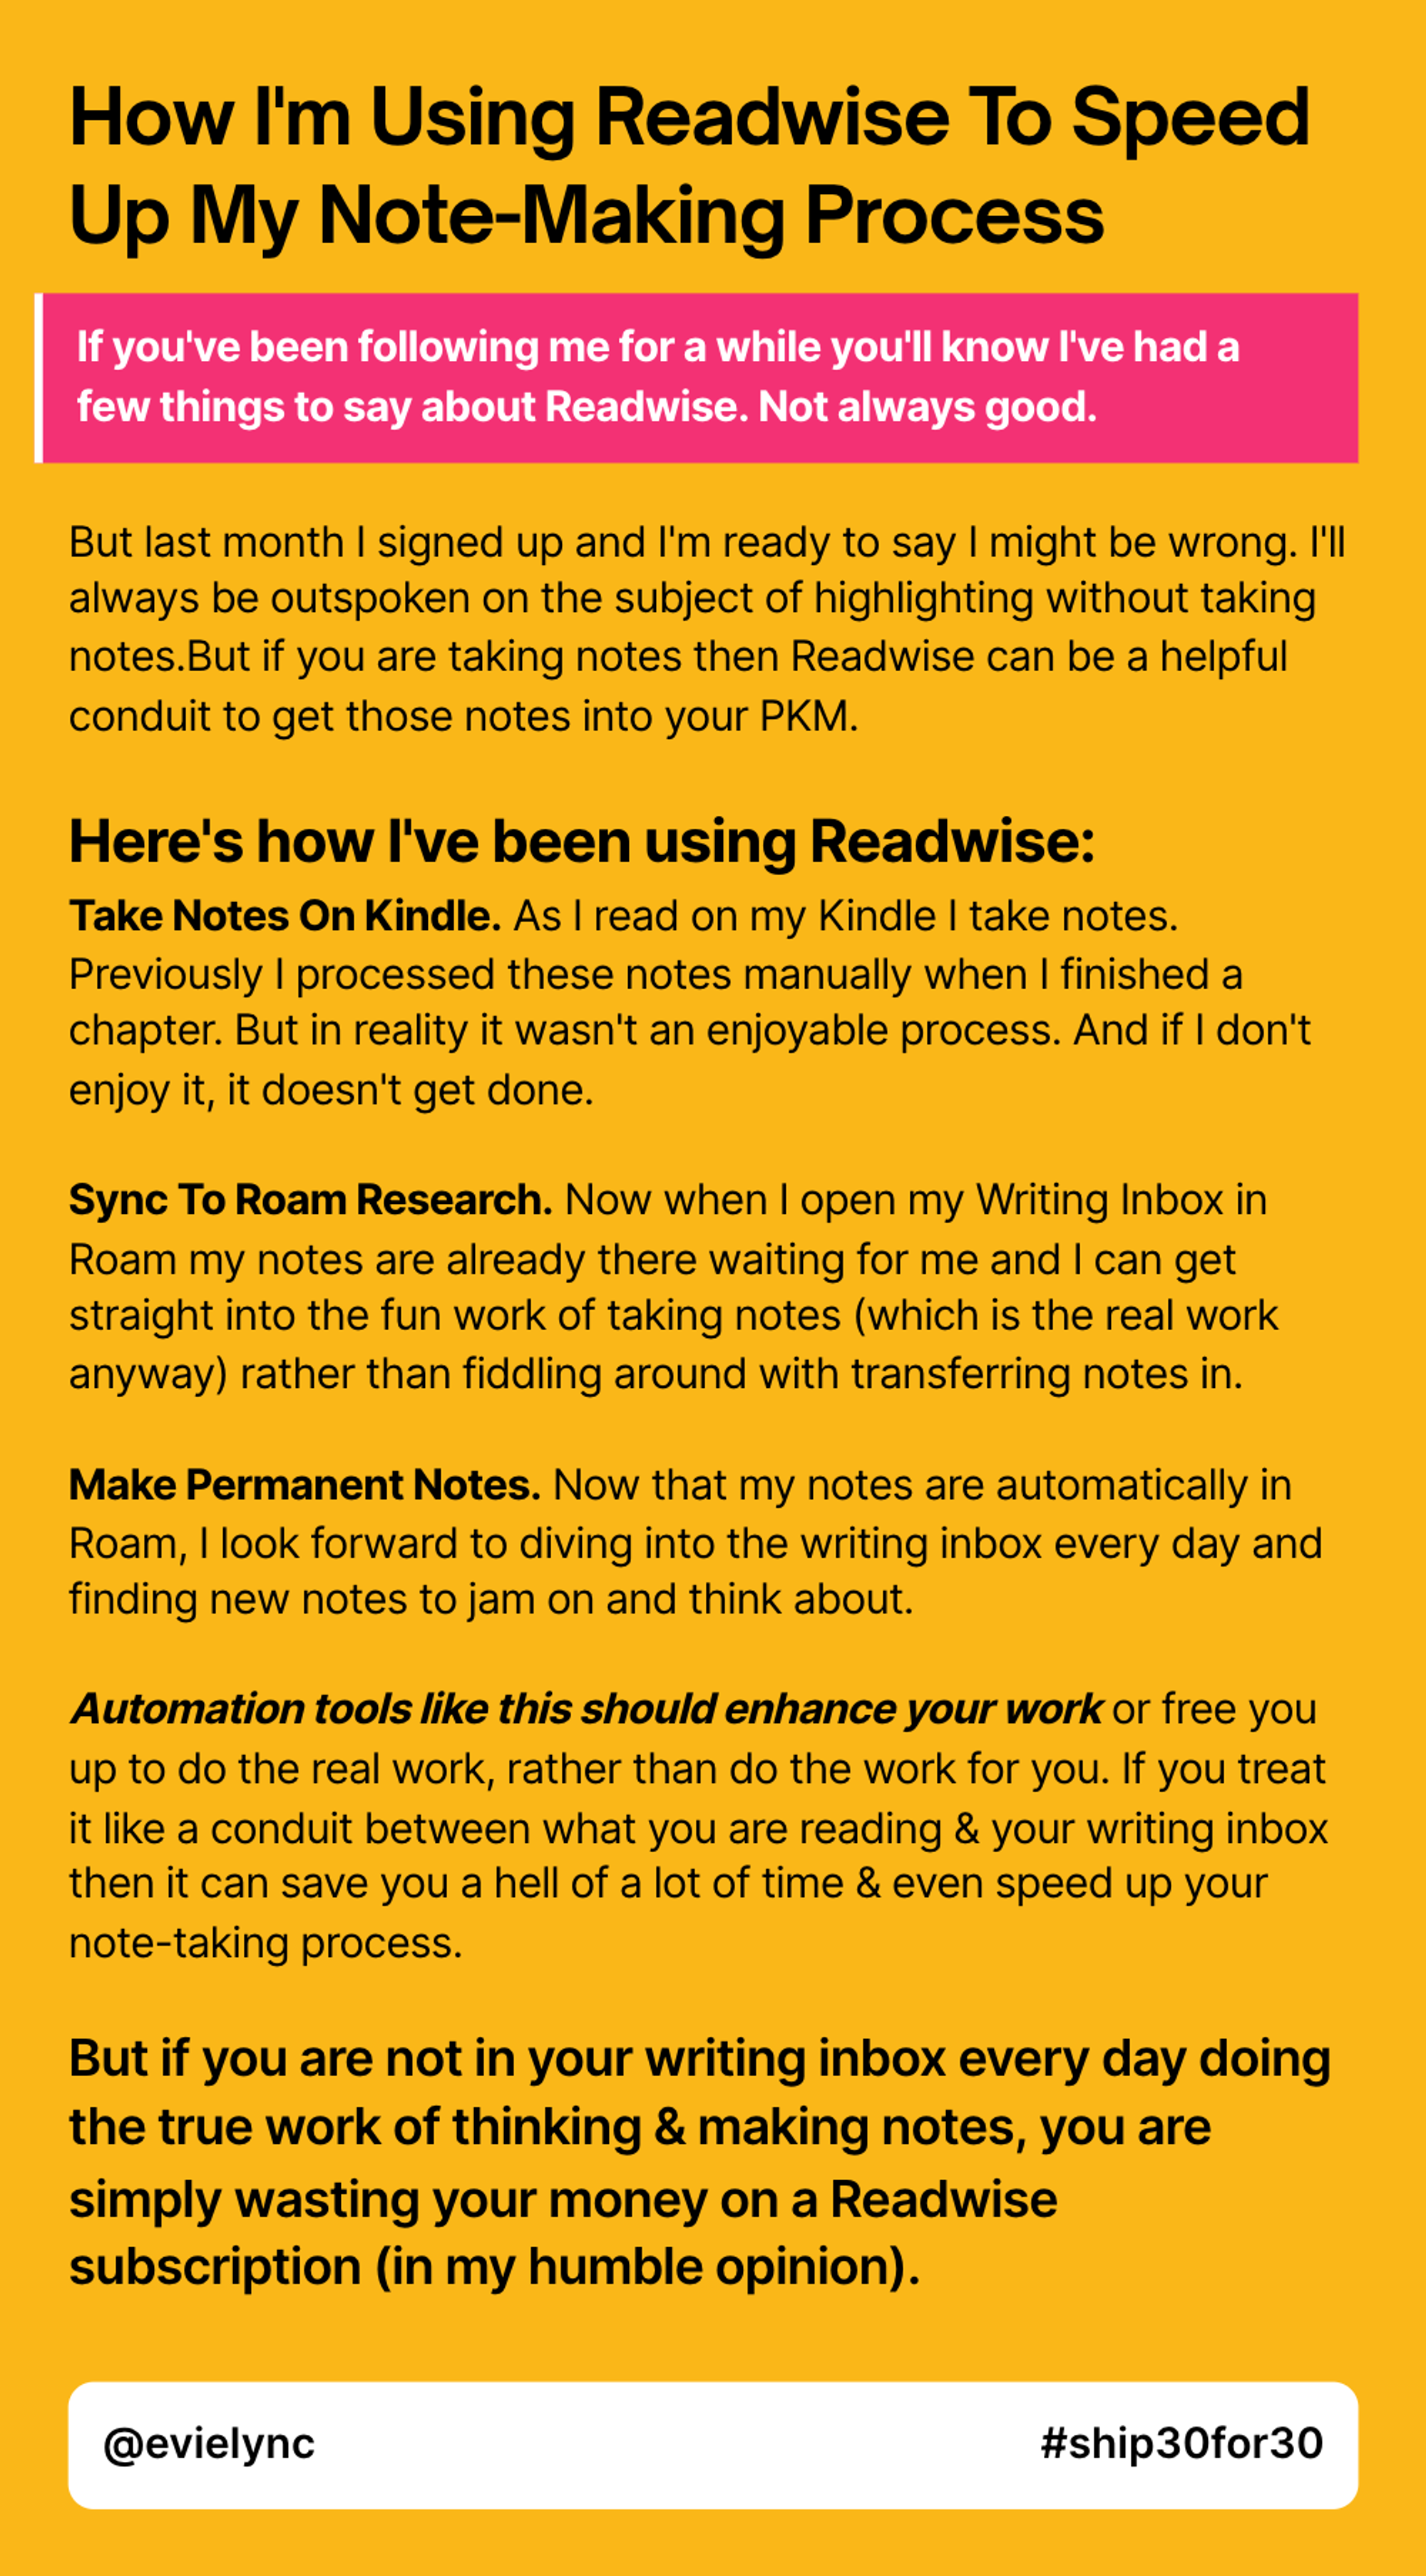 How I'm Using Readwise To Speed Up My Note-Making Process